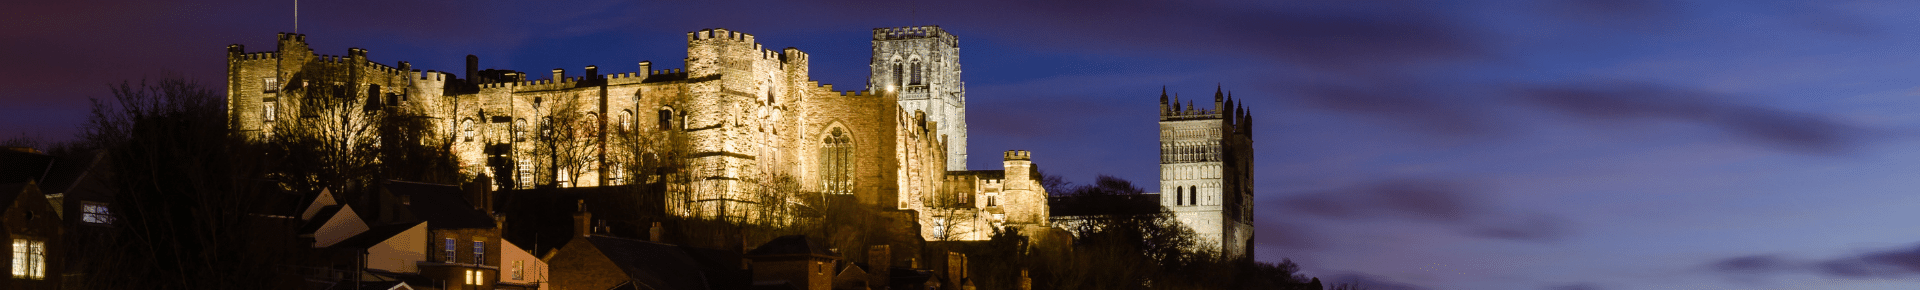 Durham cathedral and castle skyline at night